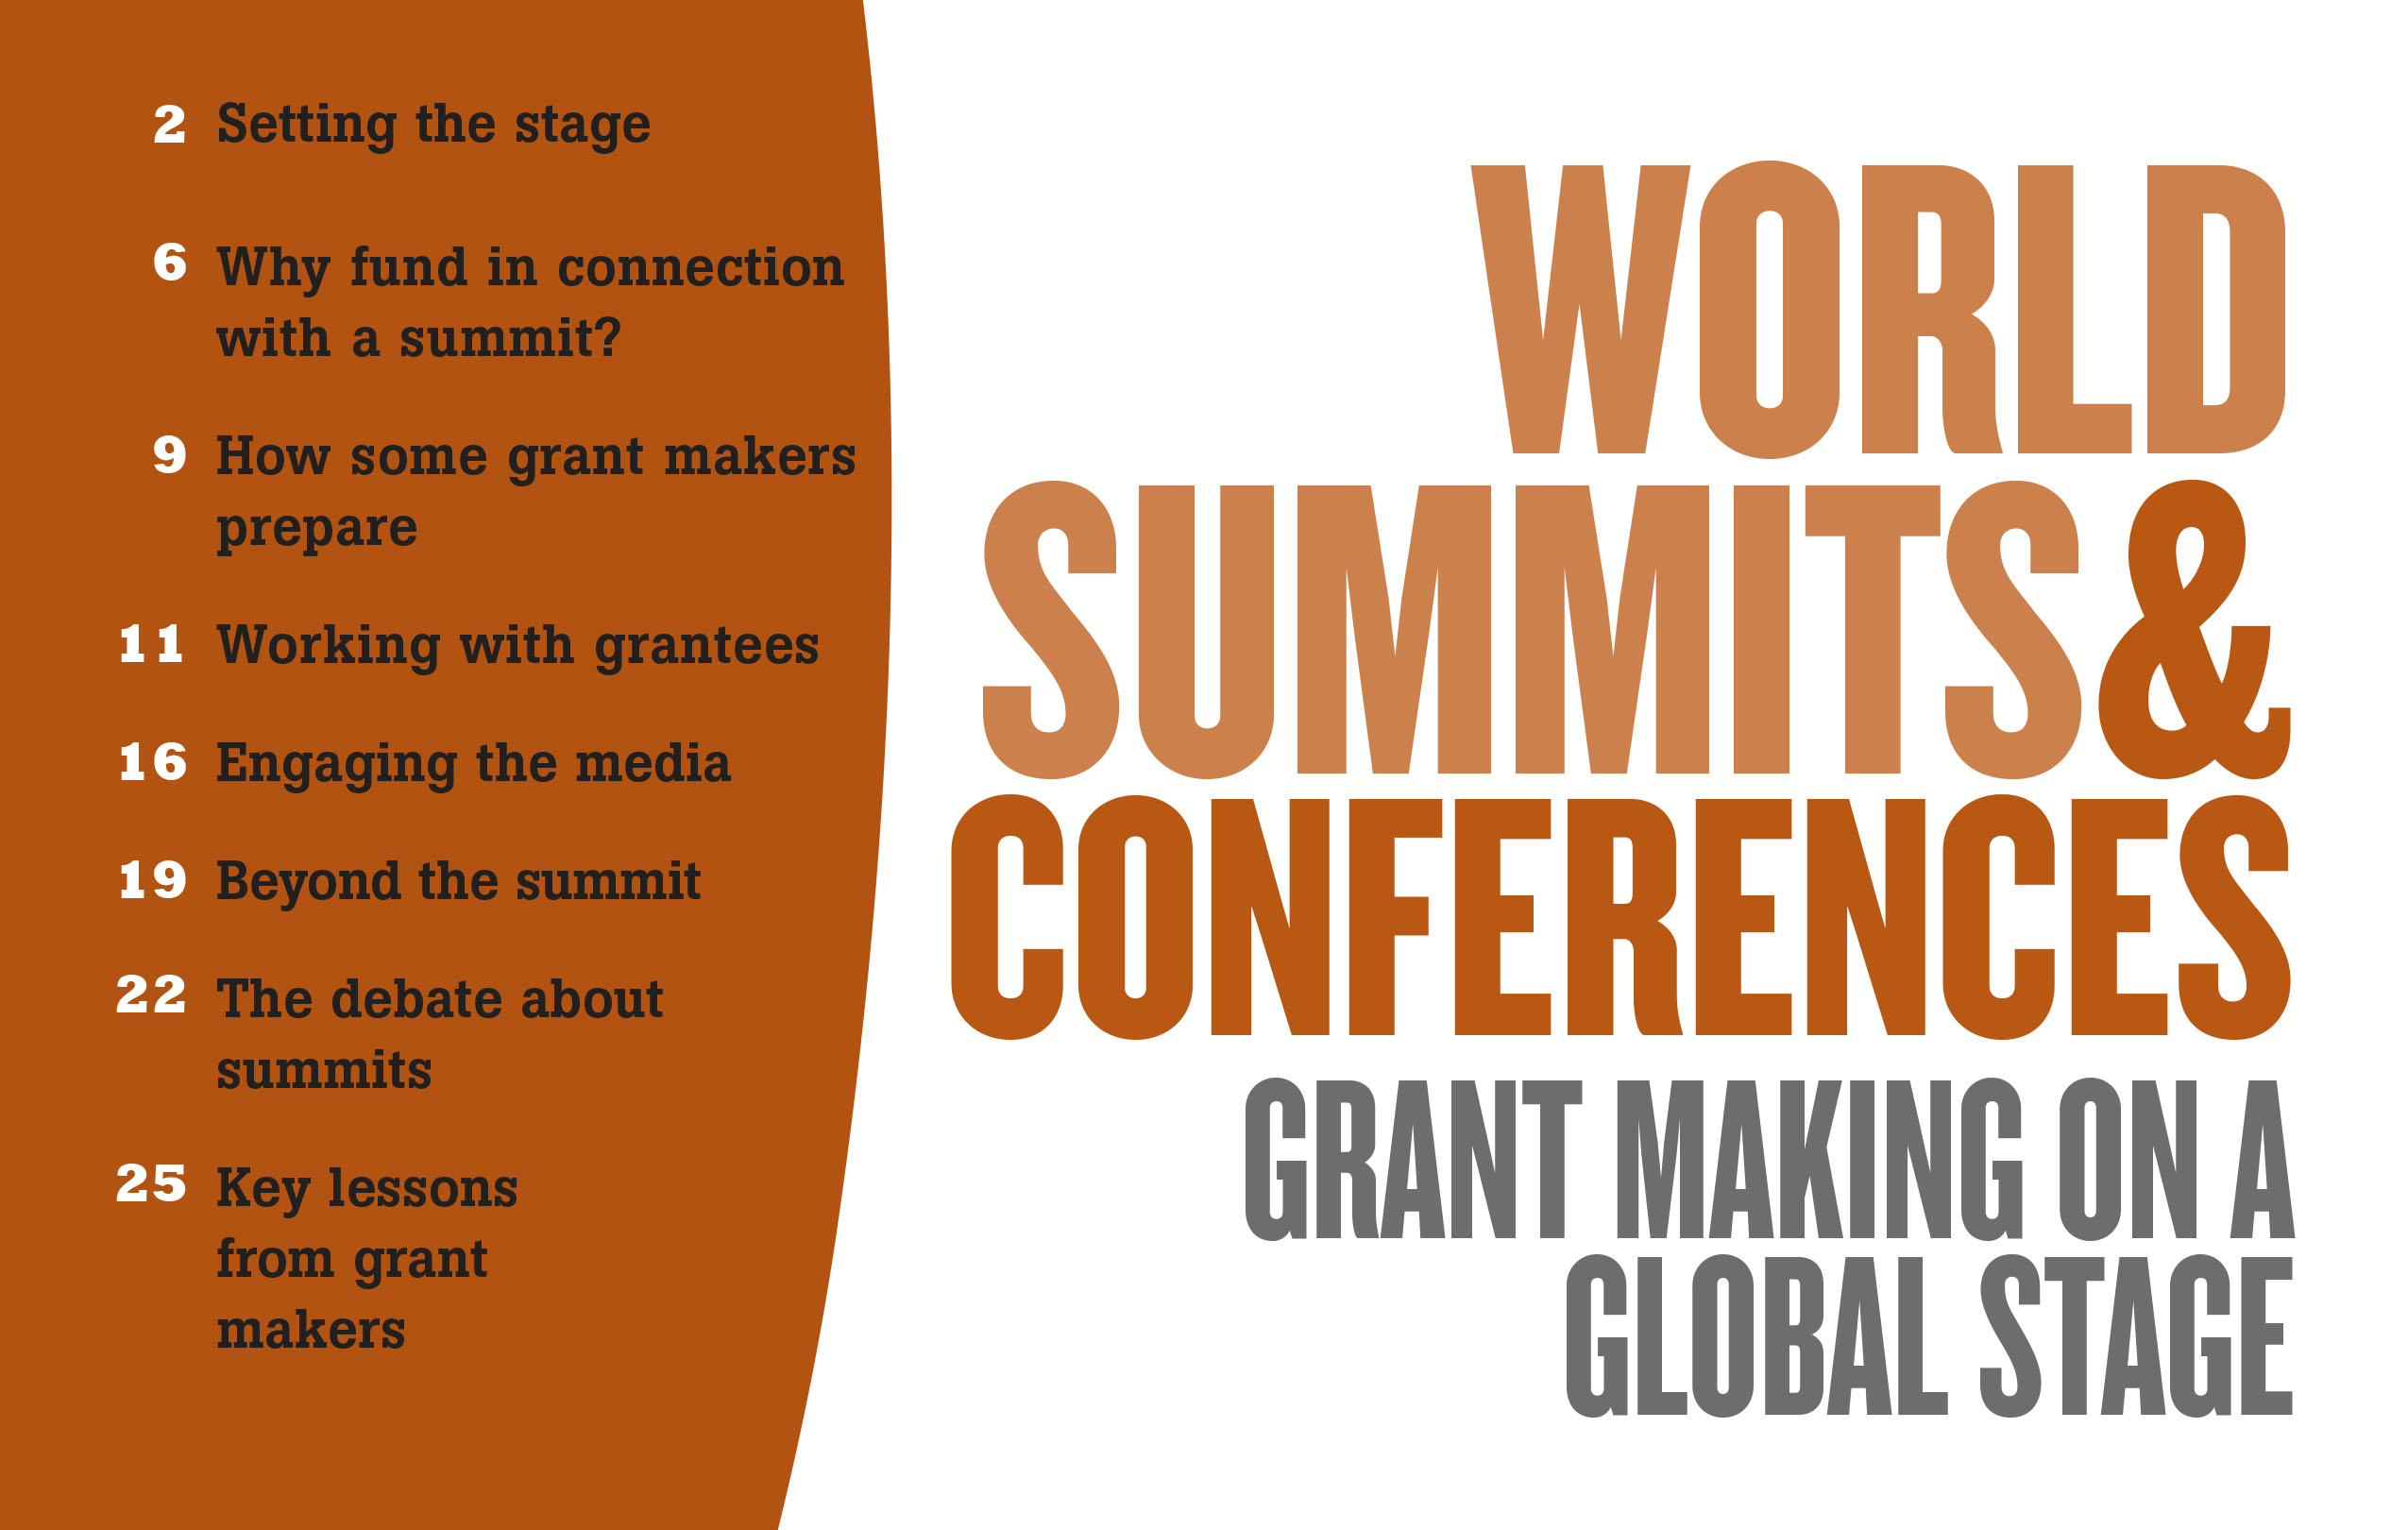 World Summits and Conferences